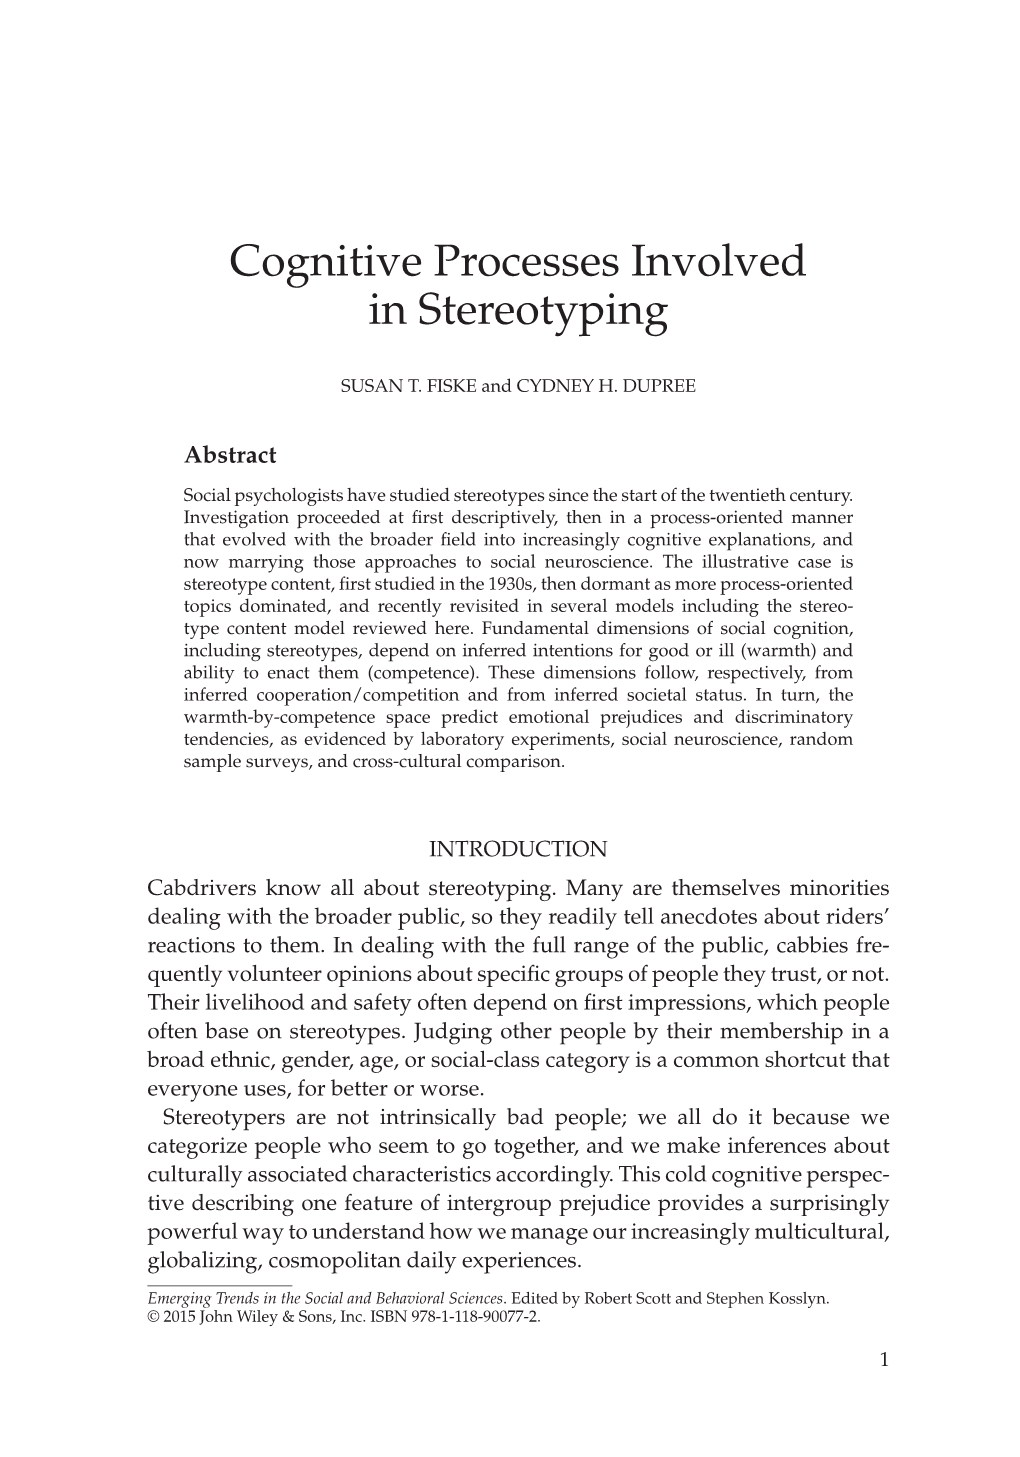 "Cognitive Processes Involved in Stereotyping" In